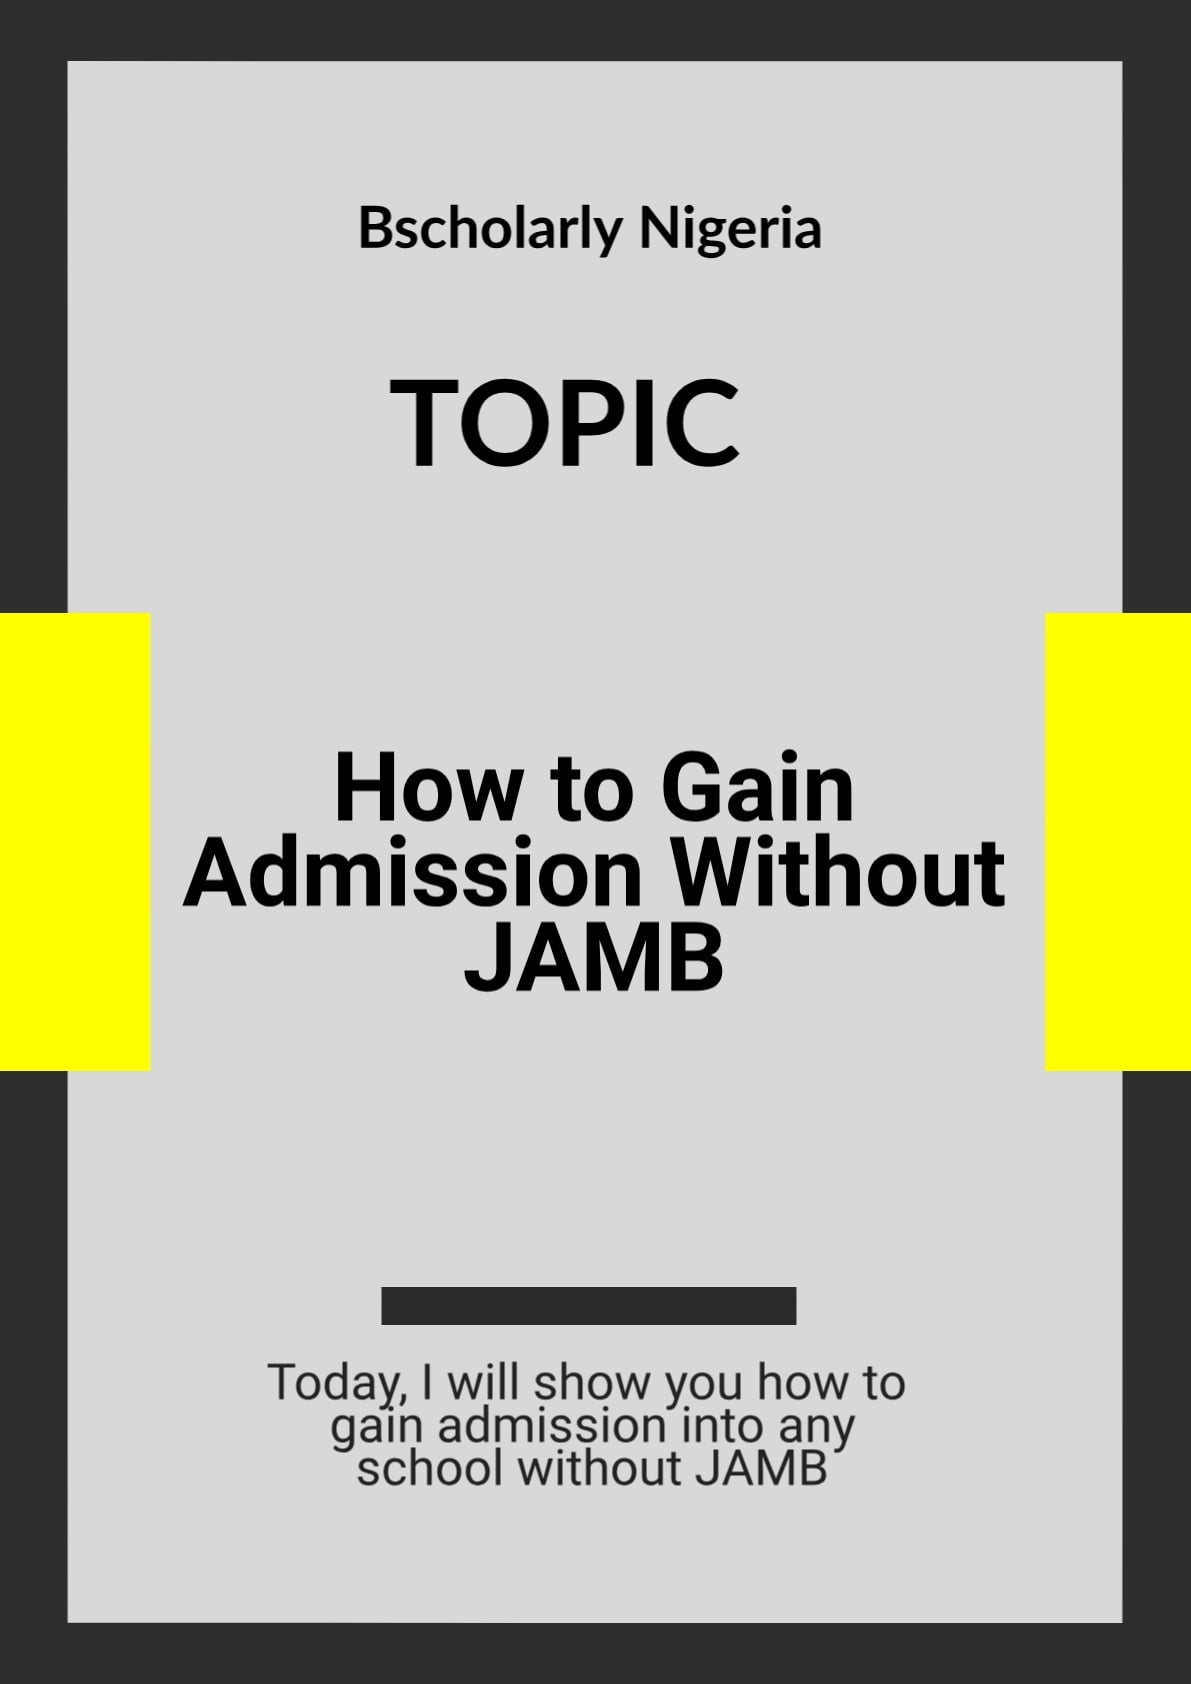 How To Gain Admission Without JAMB: 5 Tentative Ways